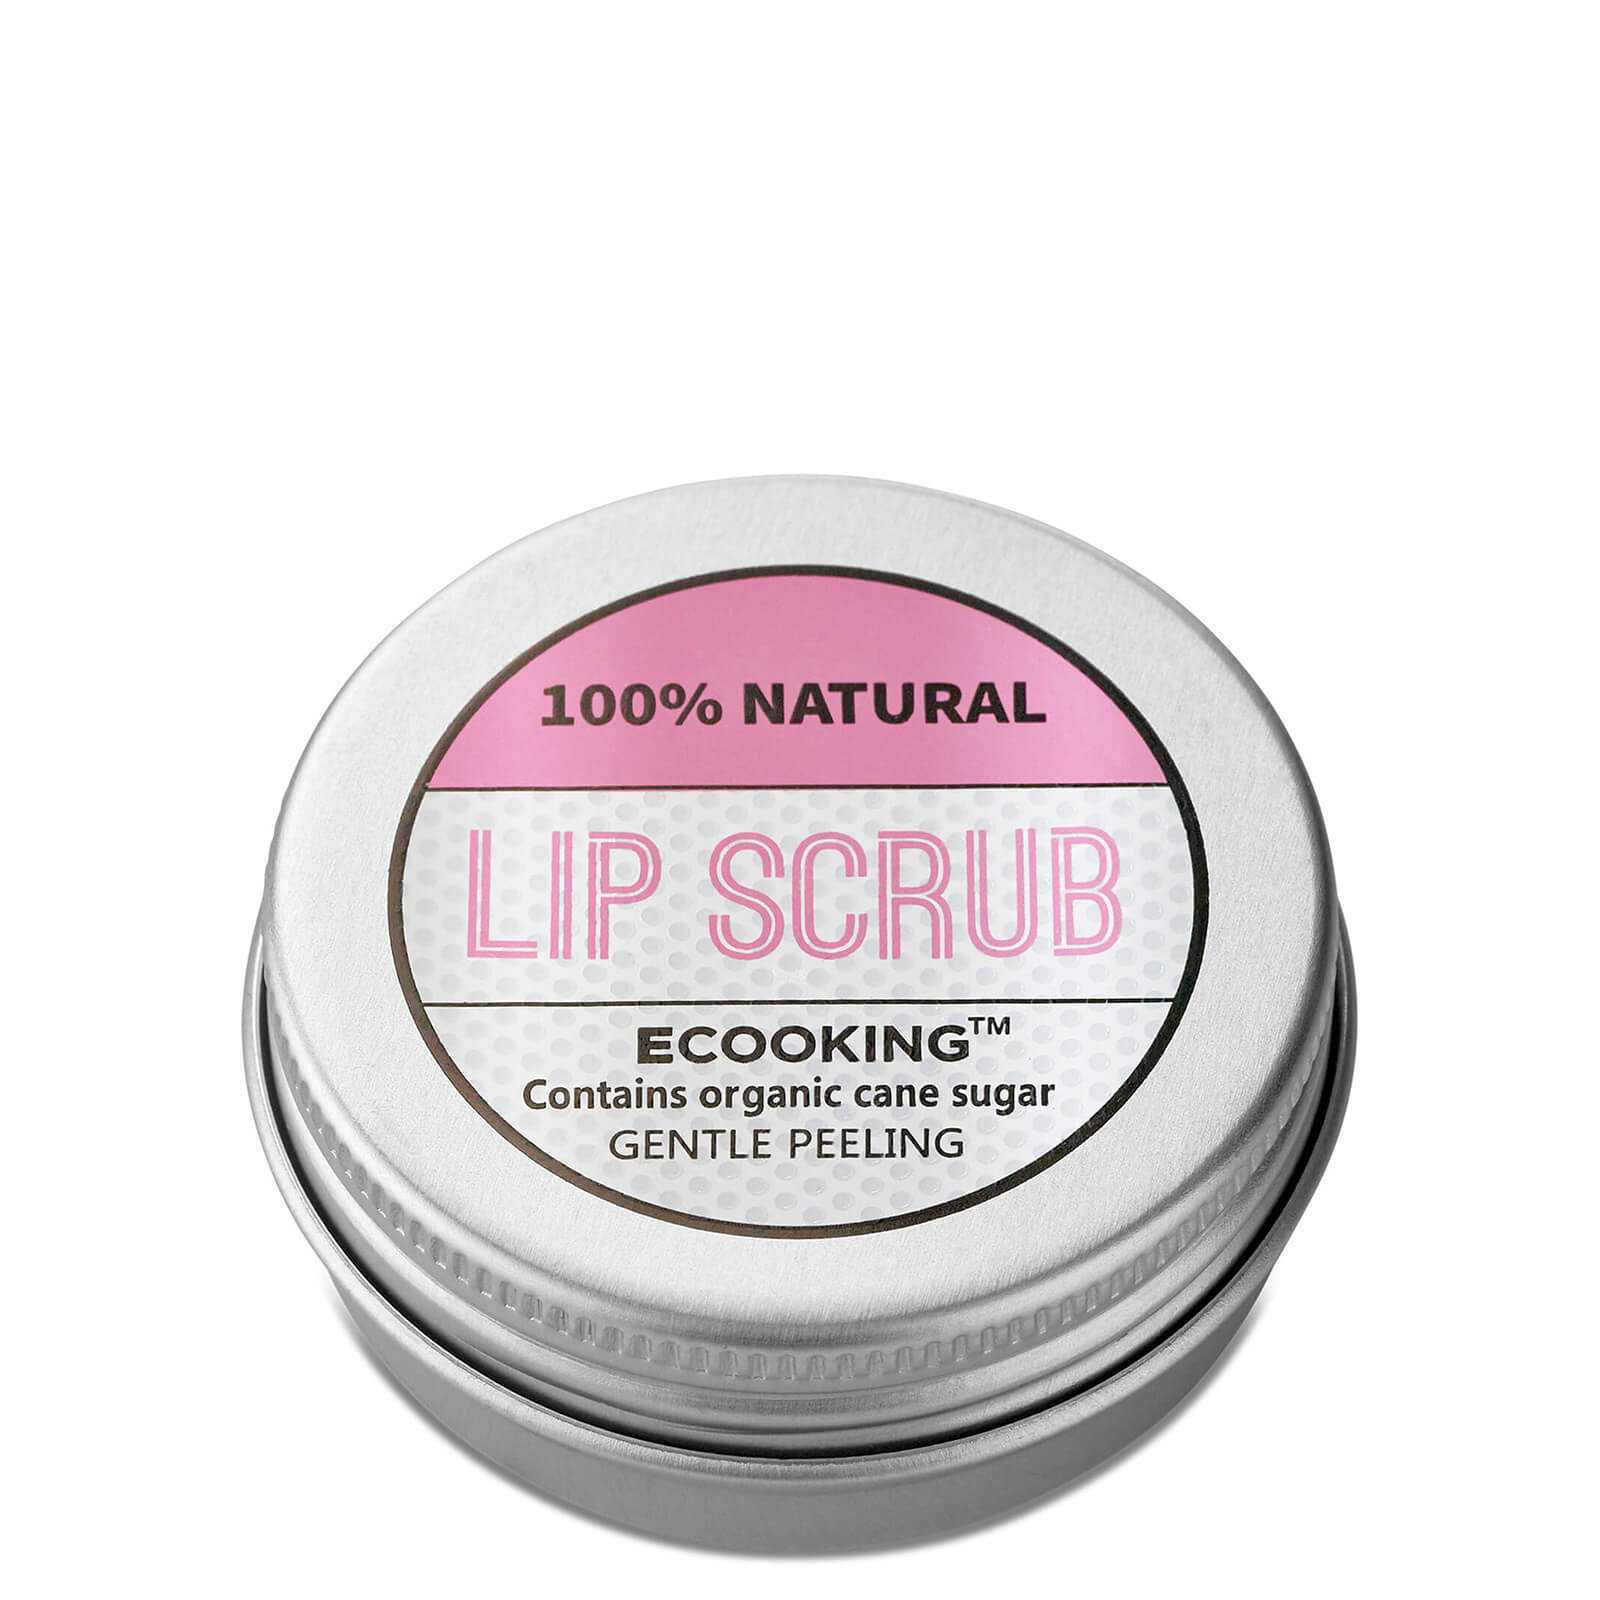 Photos - Facial / Body Cleansing Product Ecooking Lip Scrub 30ml 61023